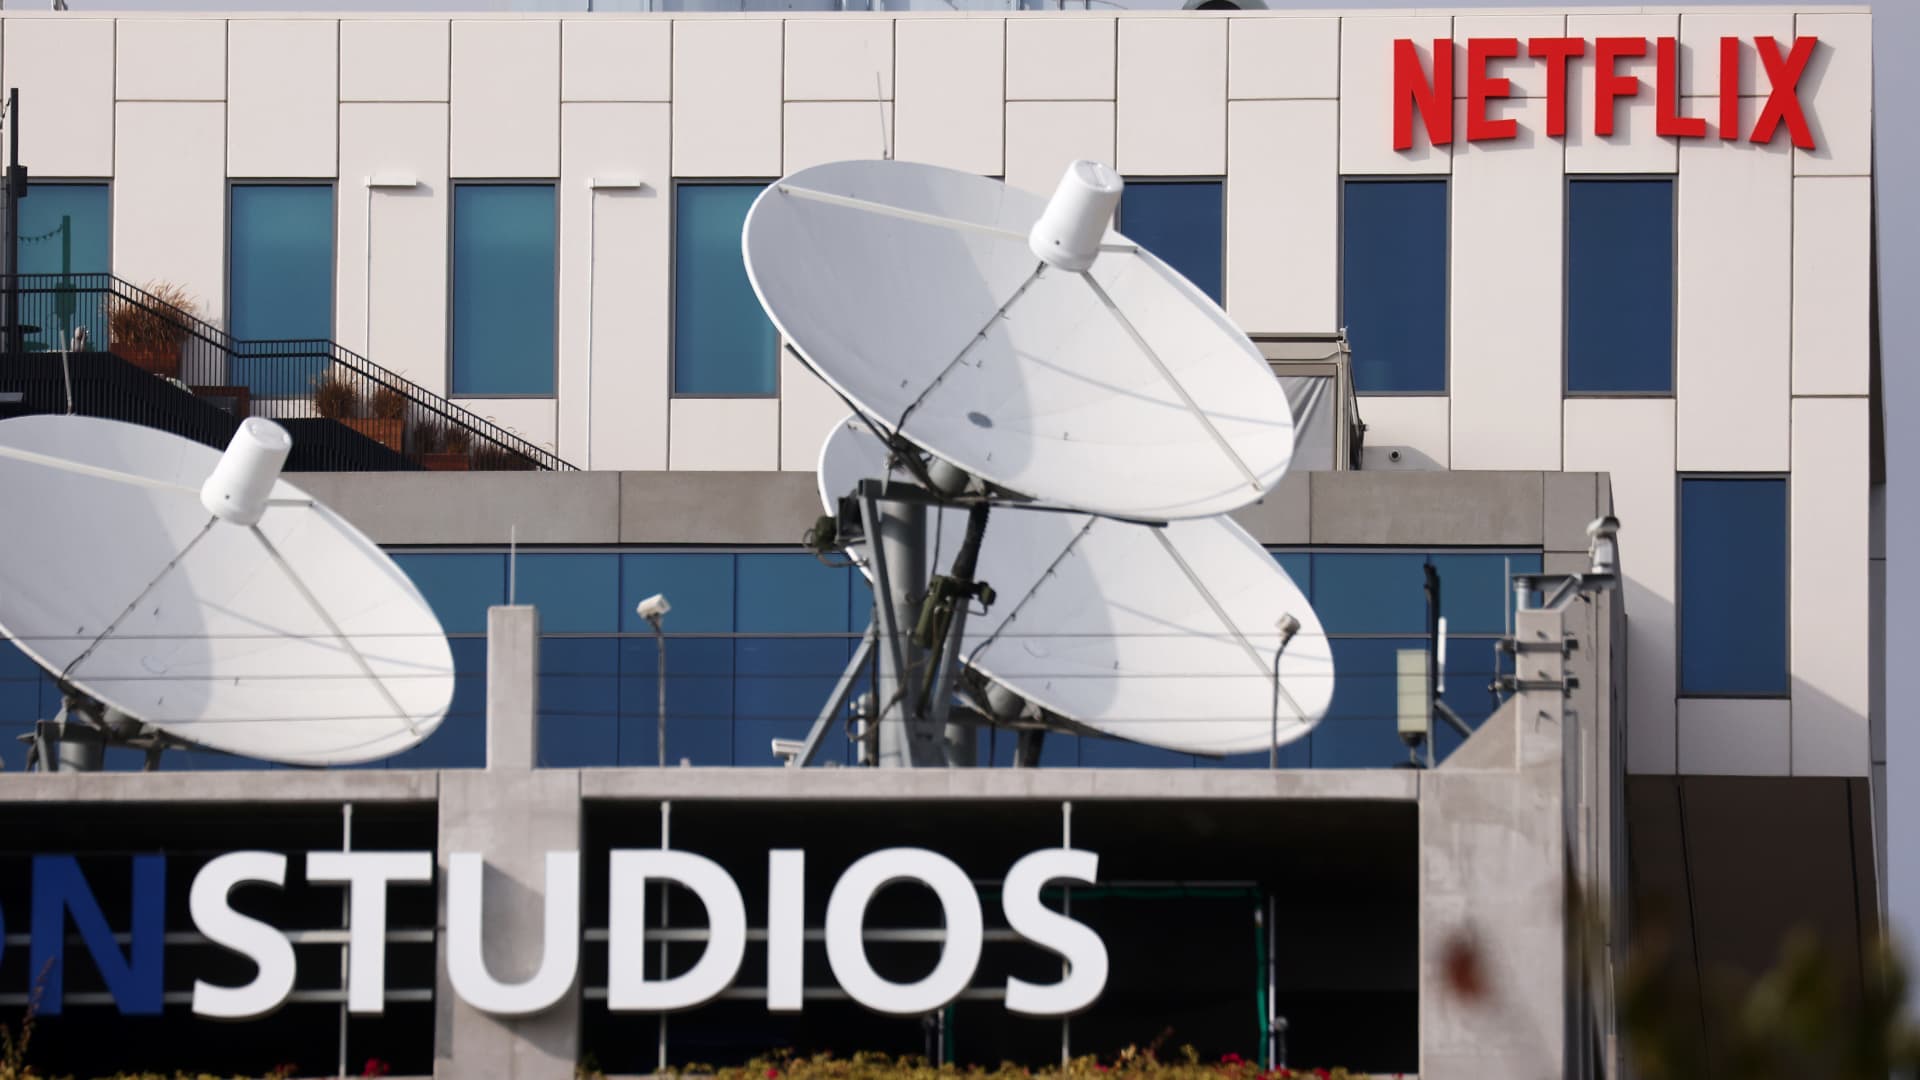 The Netflix logo is displayed at Netflix's Los Angeles headquarters (TOP) on October 07, 2021 in Los Angeles, California.